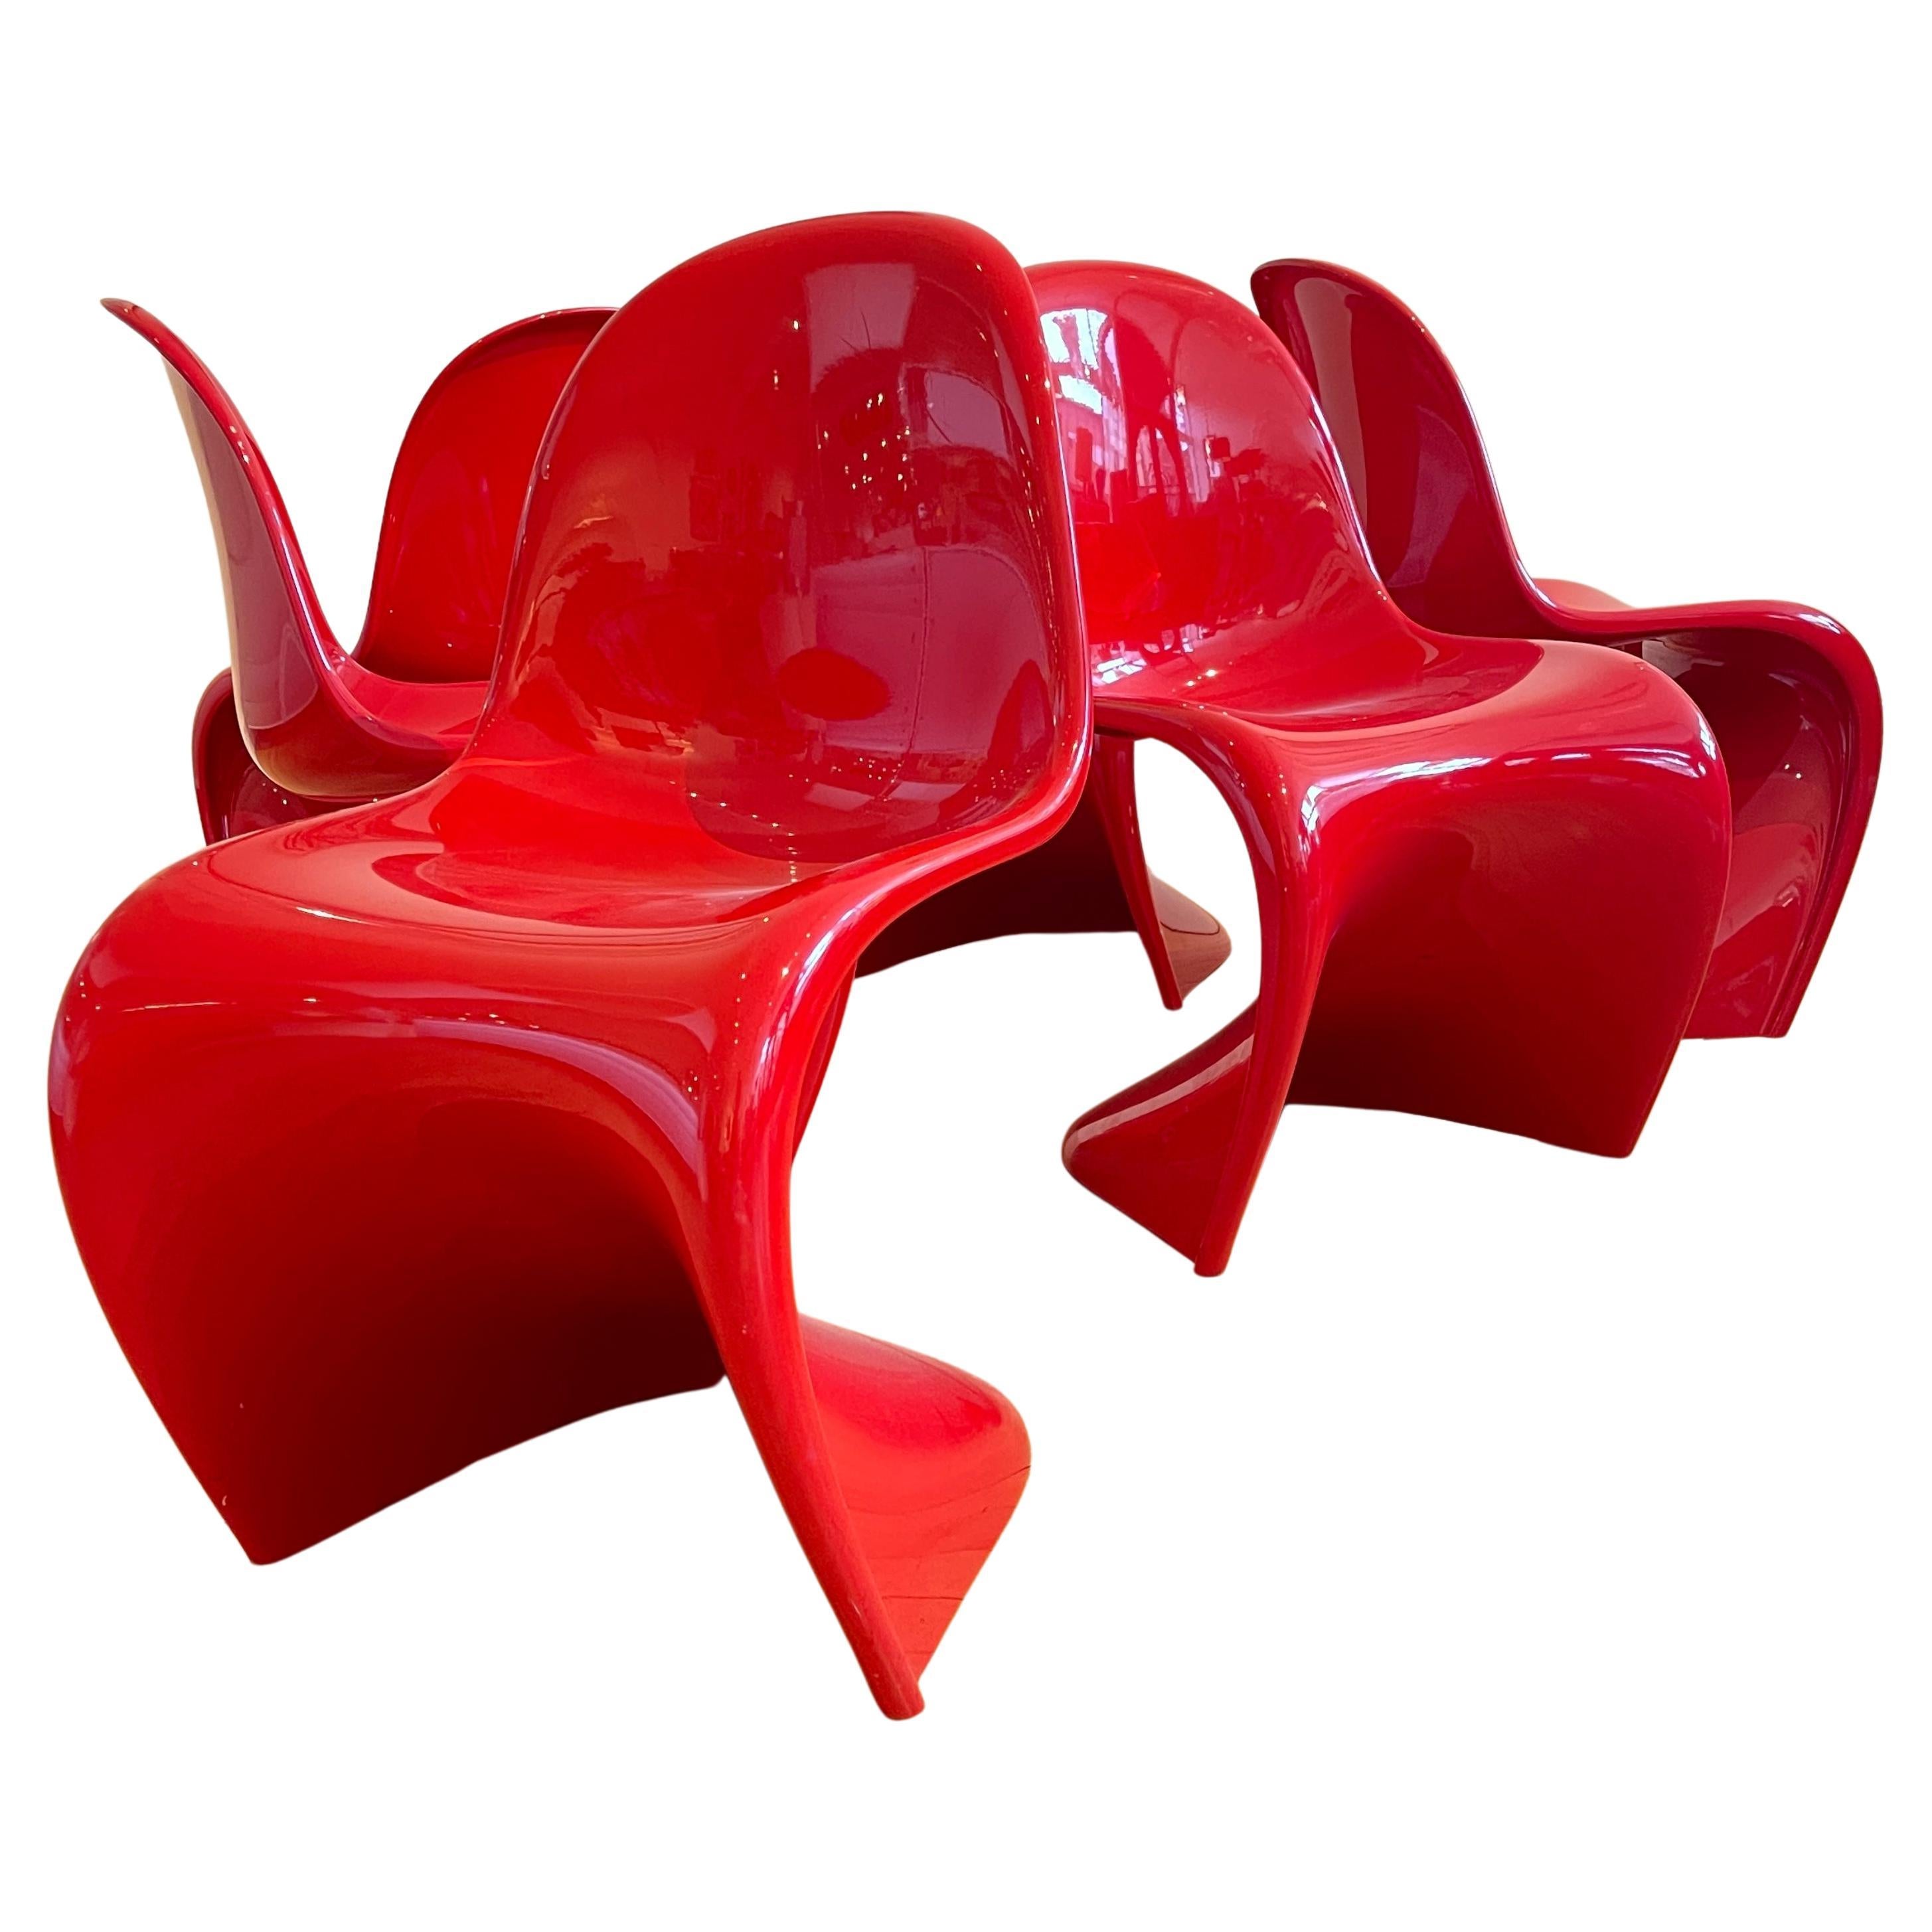 Verner Panton Classic Chairs in Red 2  Available